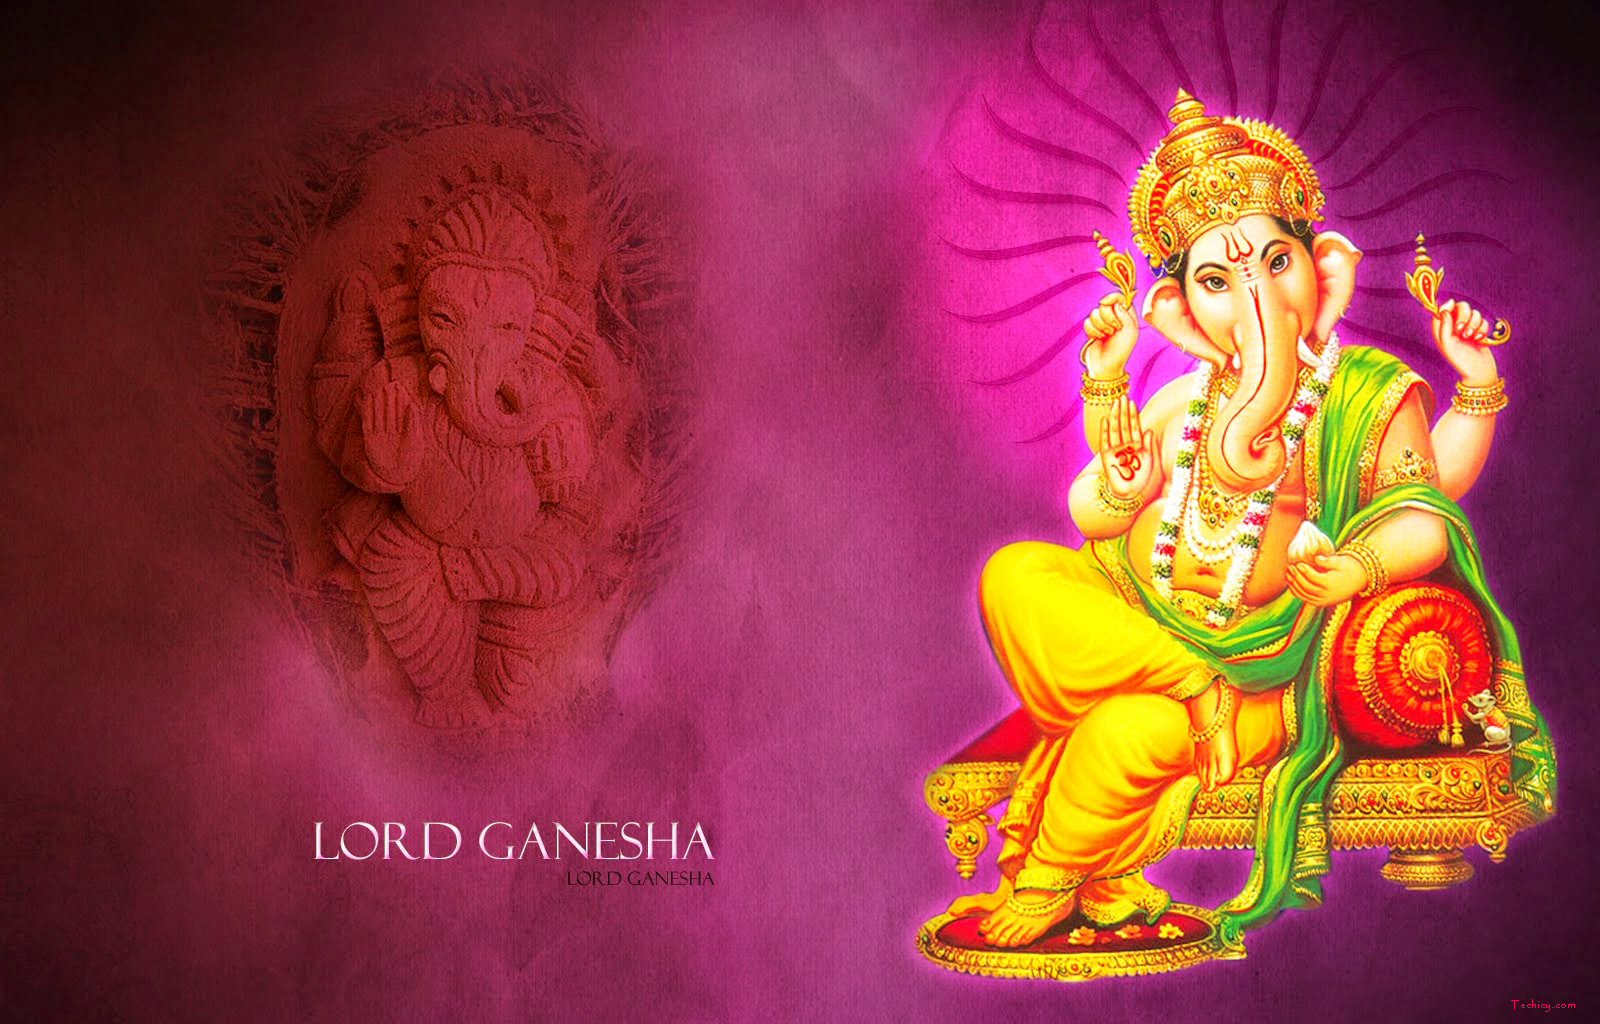 Ganesh Chaturthi Wallpapers For Mobile & PC - Free Download 